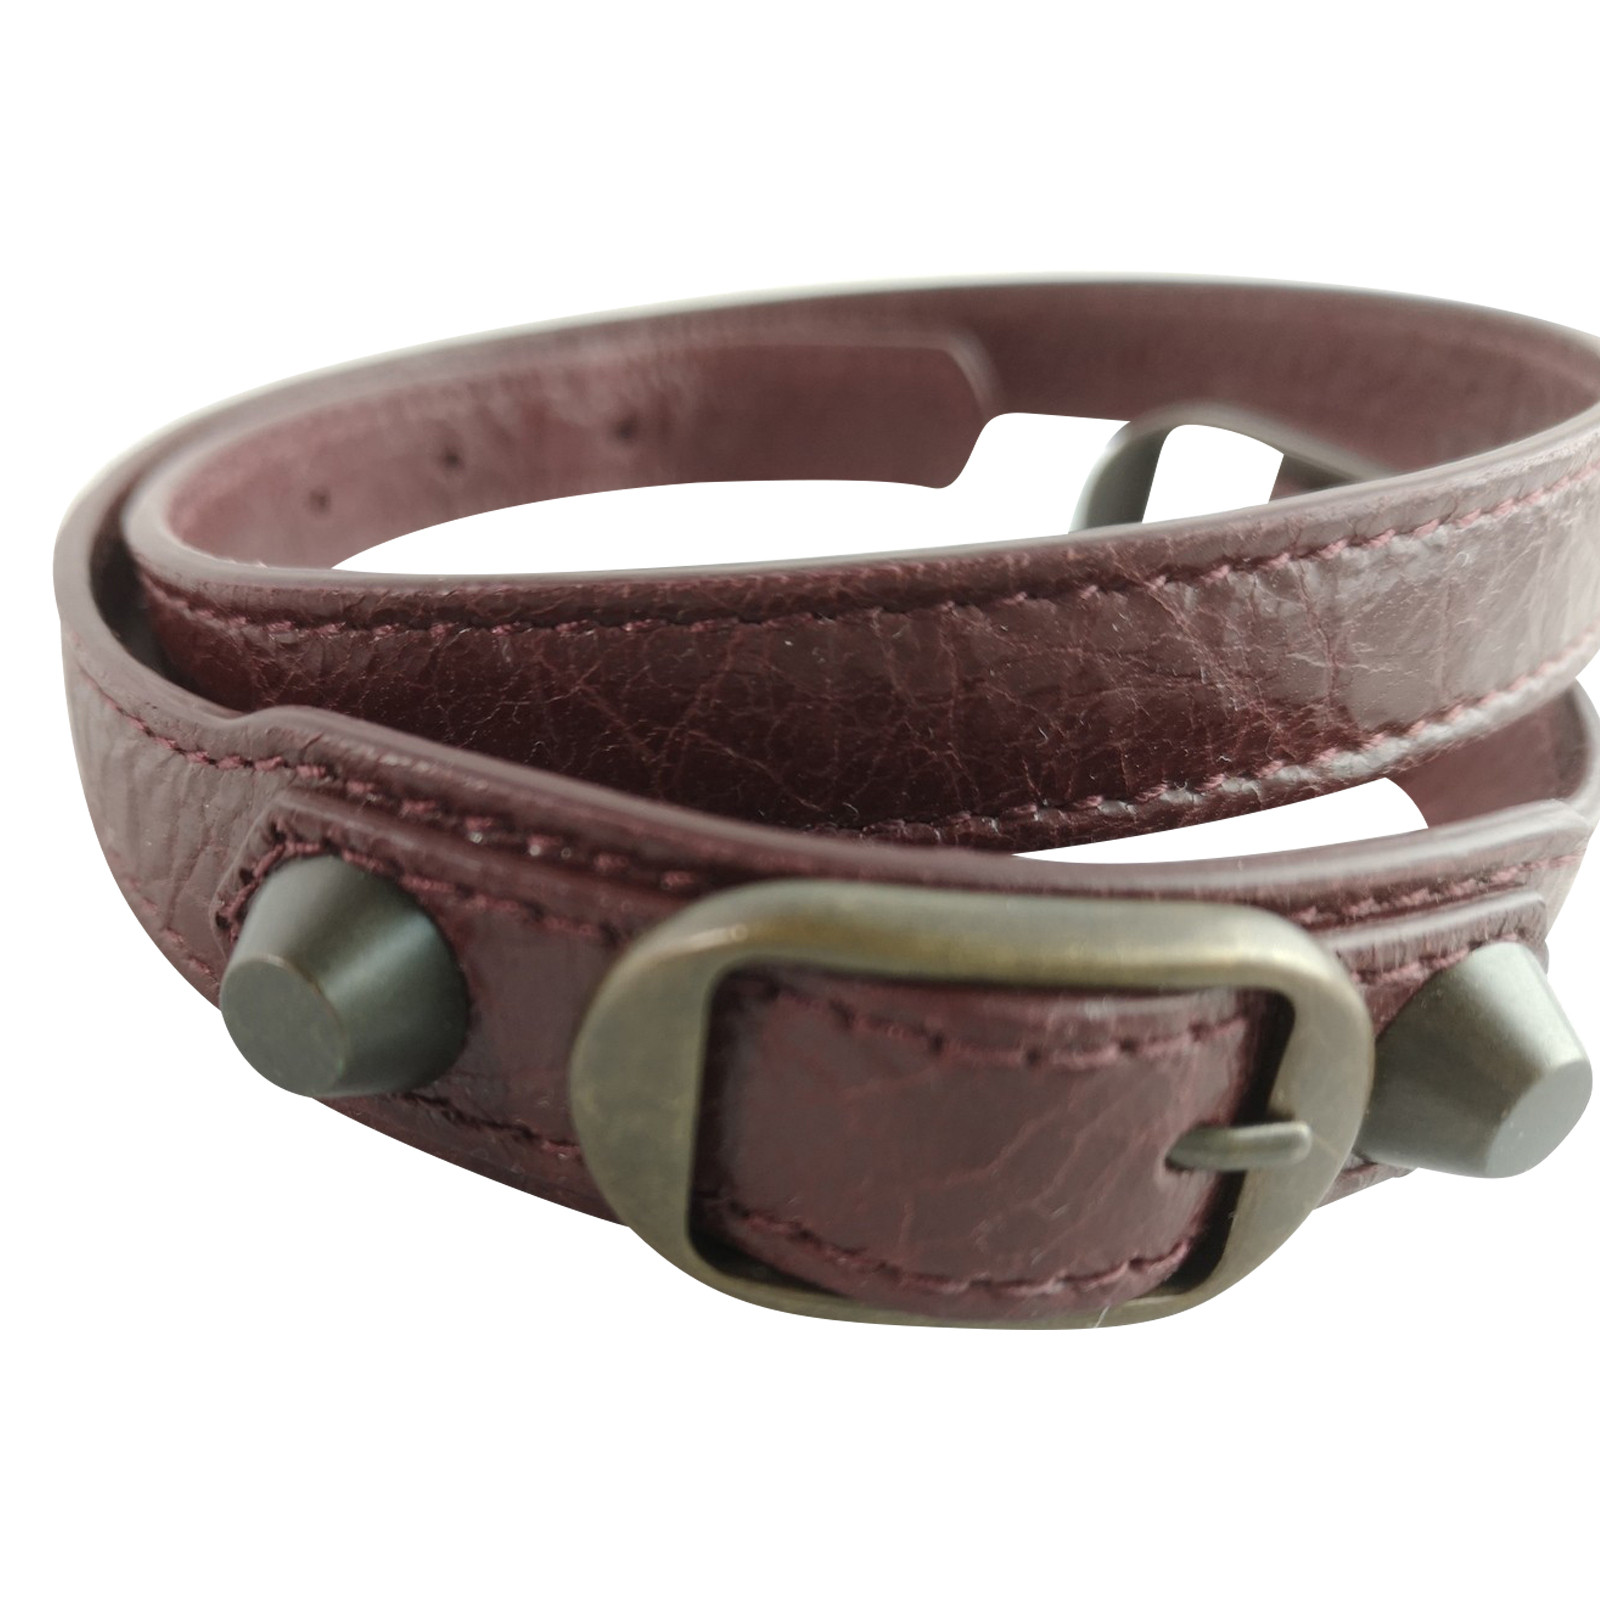 Balenciaga Bracelet/Wristband Leather in Brown - Second Hand Balenciaga  Bracelet/Wristband Leather in Brown buy used for 125€ (4161664)